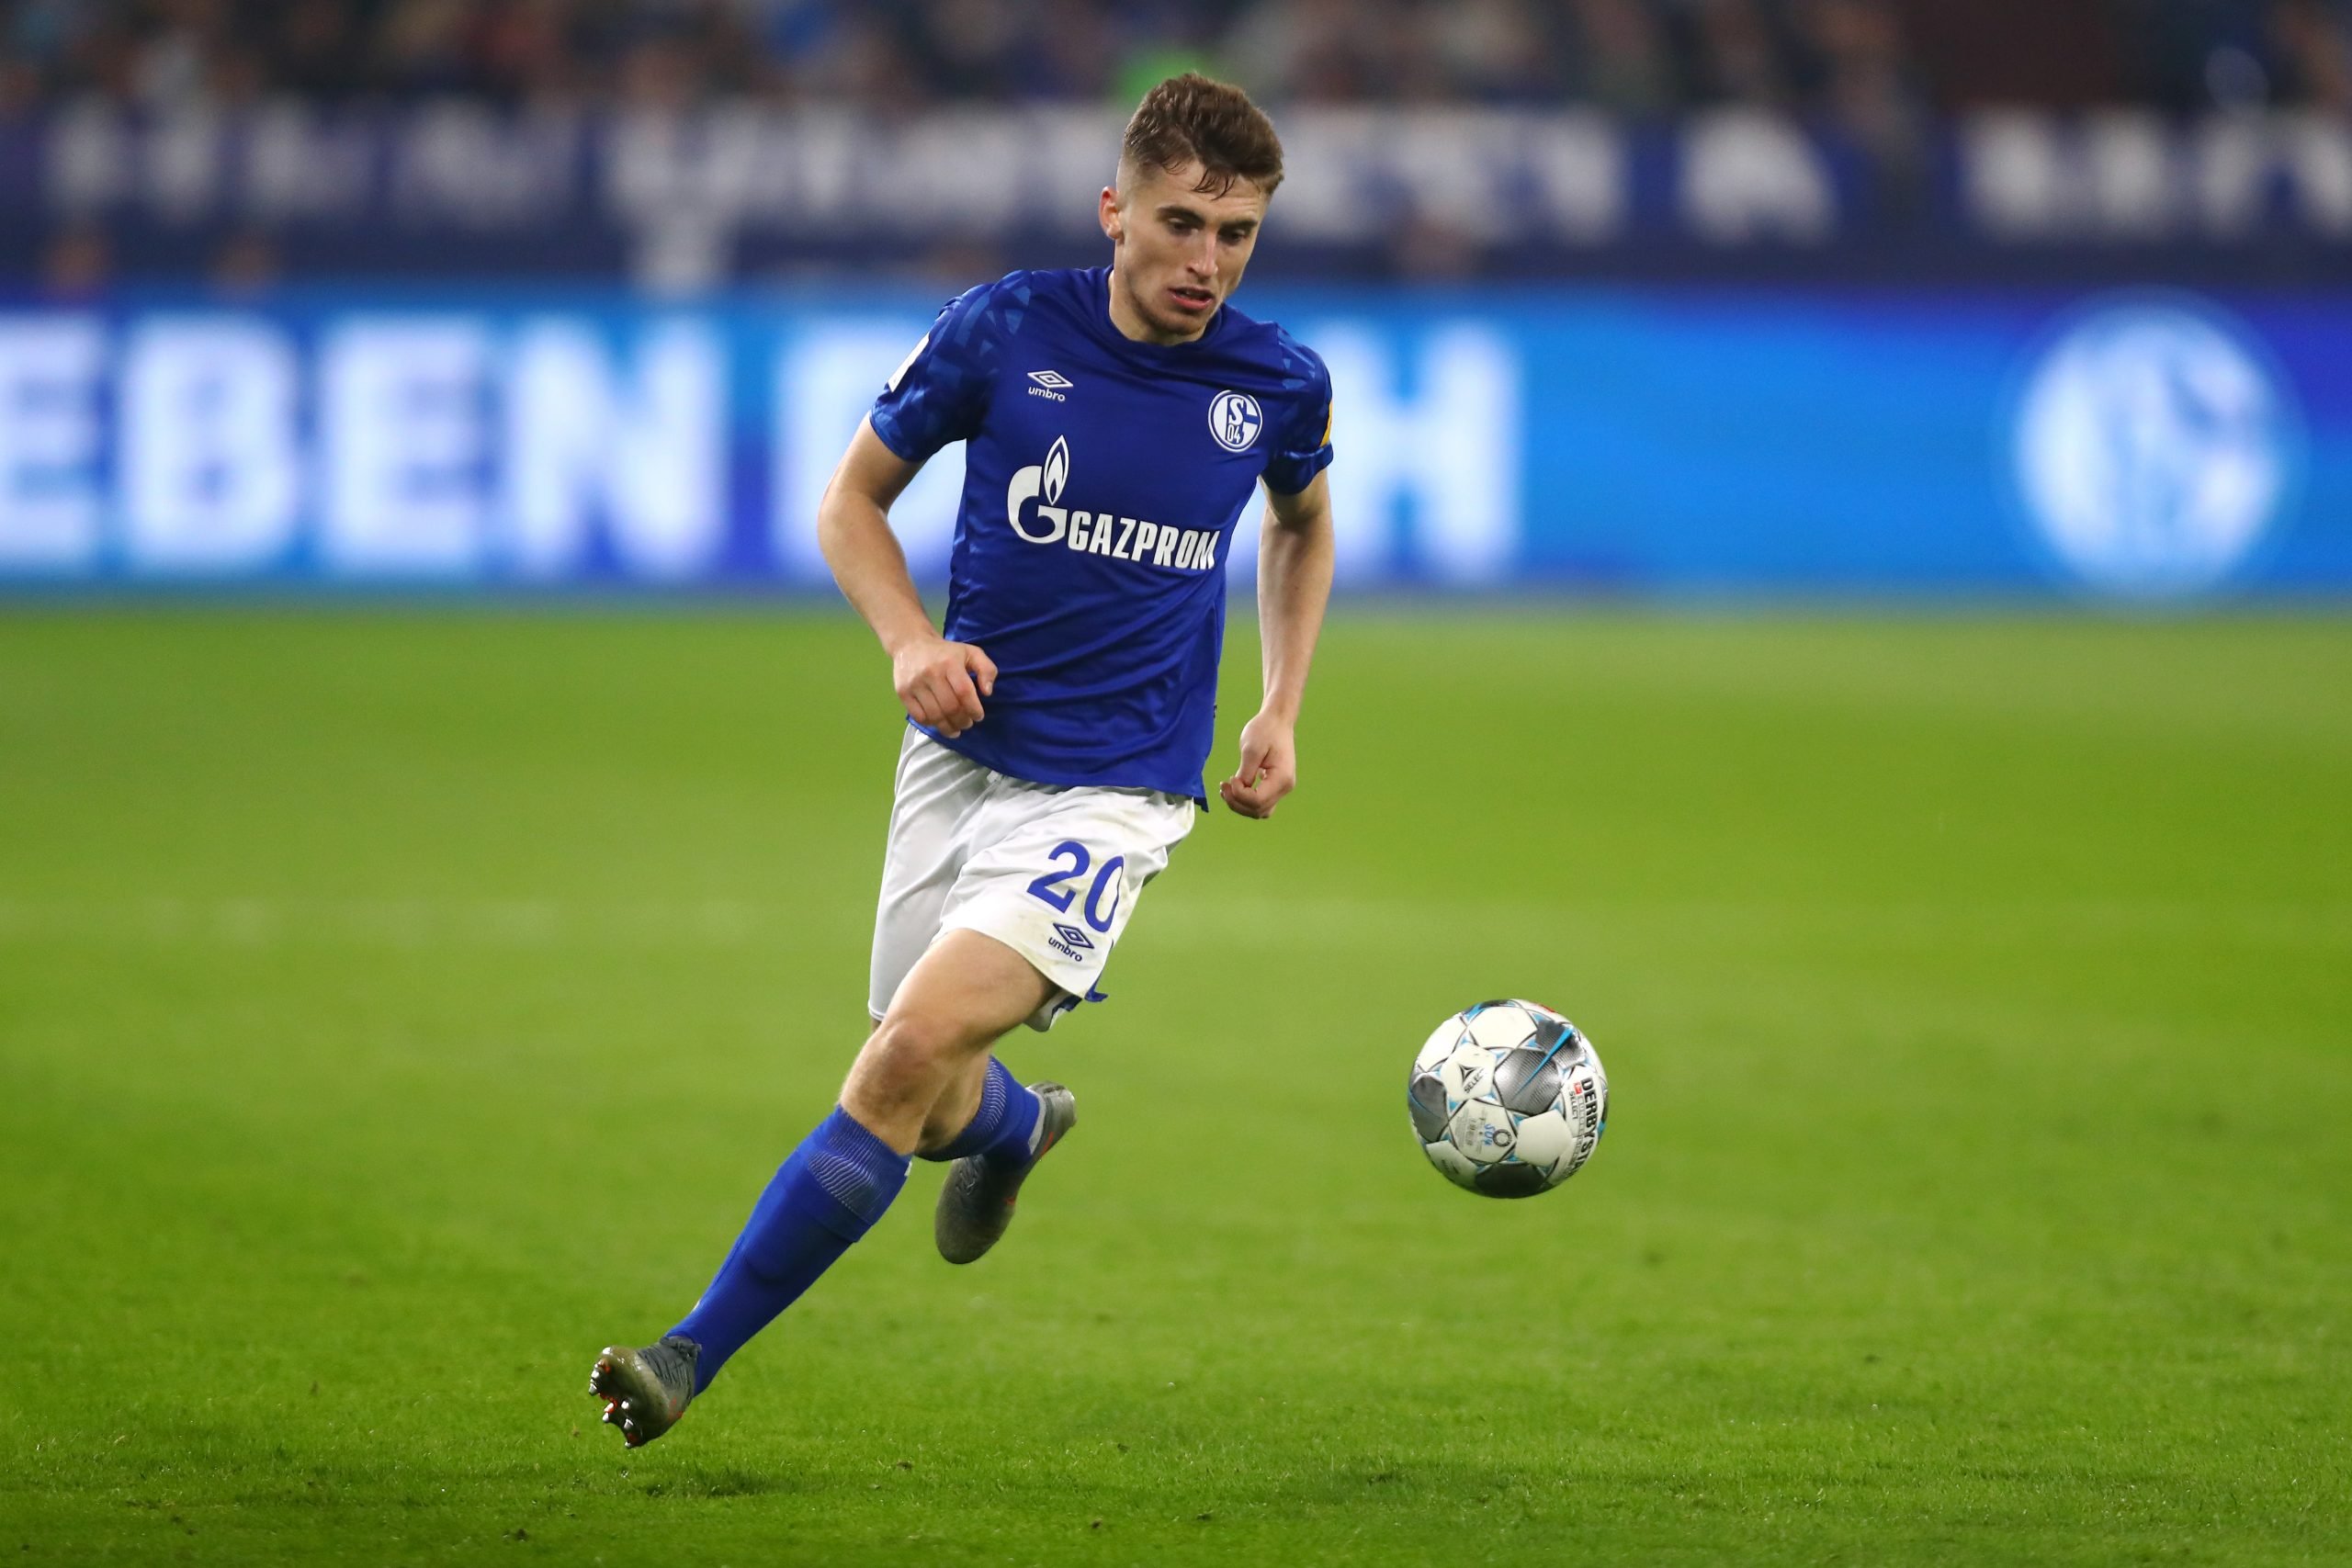 Michael Brown urges Everton's Jonjoe Kenny to leave this month (Kenny is seen in the photo)